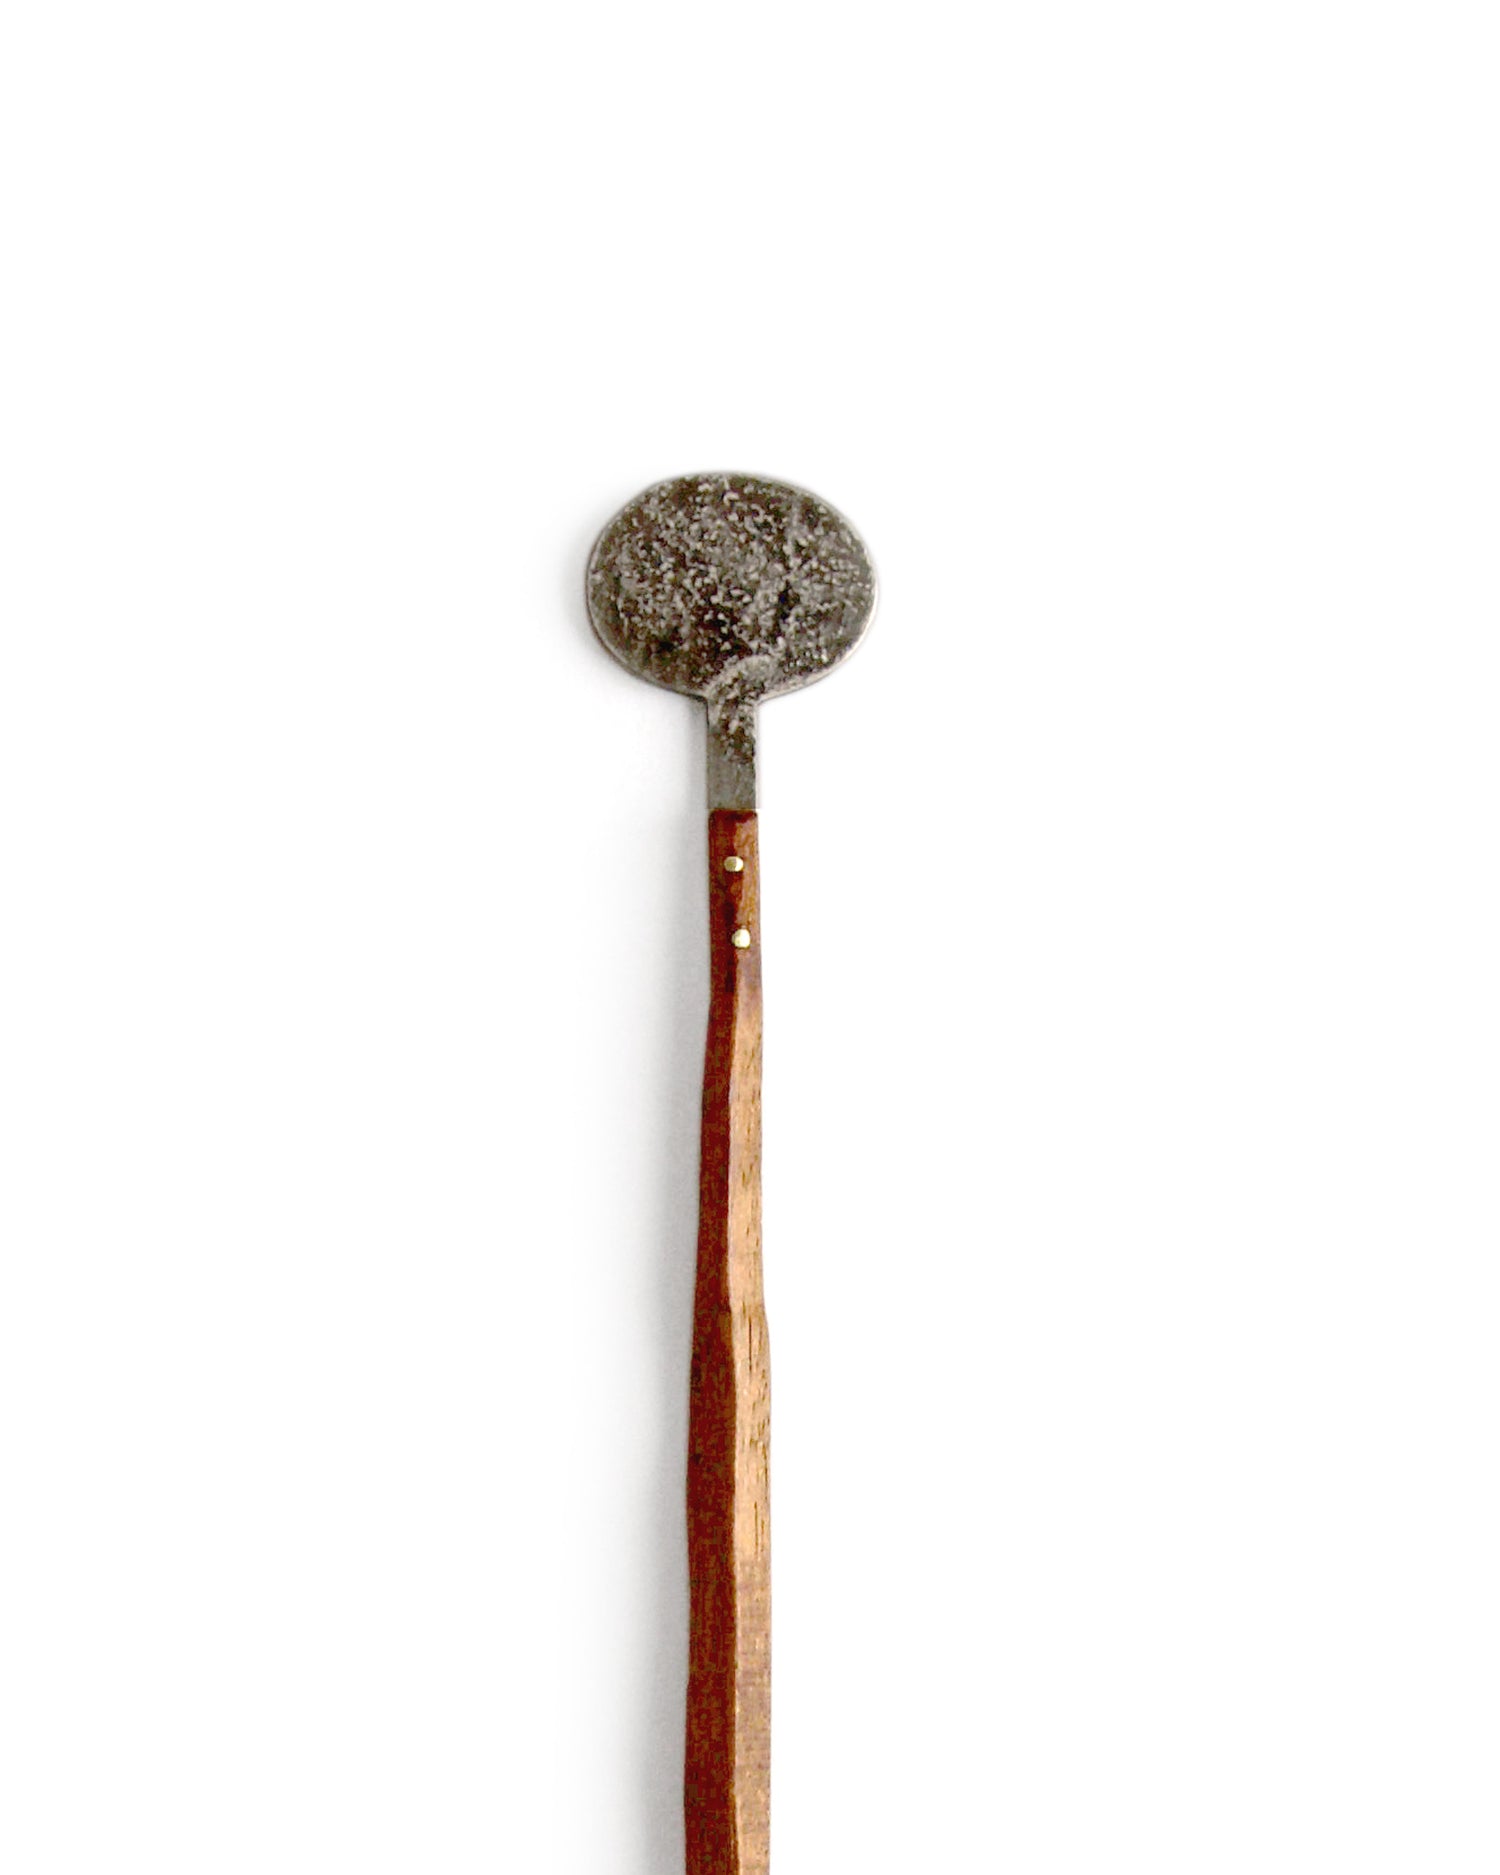 Mahogany Sprout Chashaku Tea Ladle - Paddle (OUT OF STOCK)